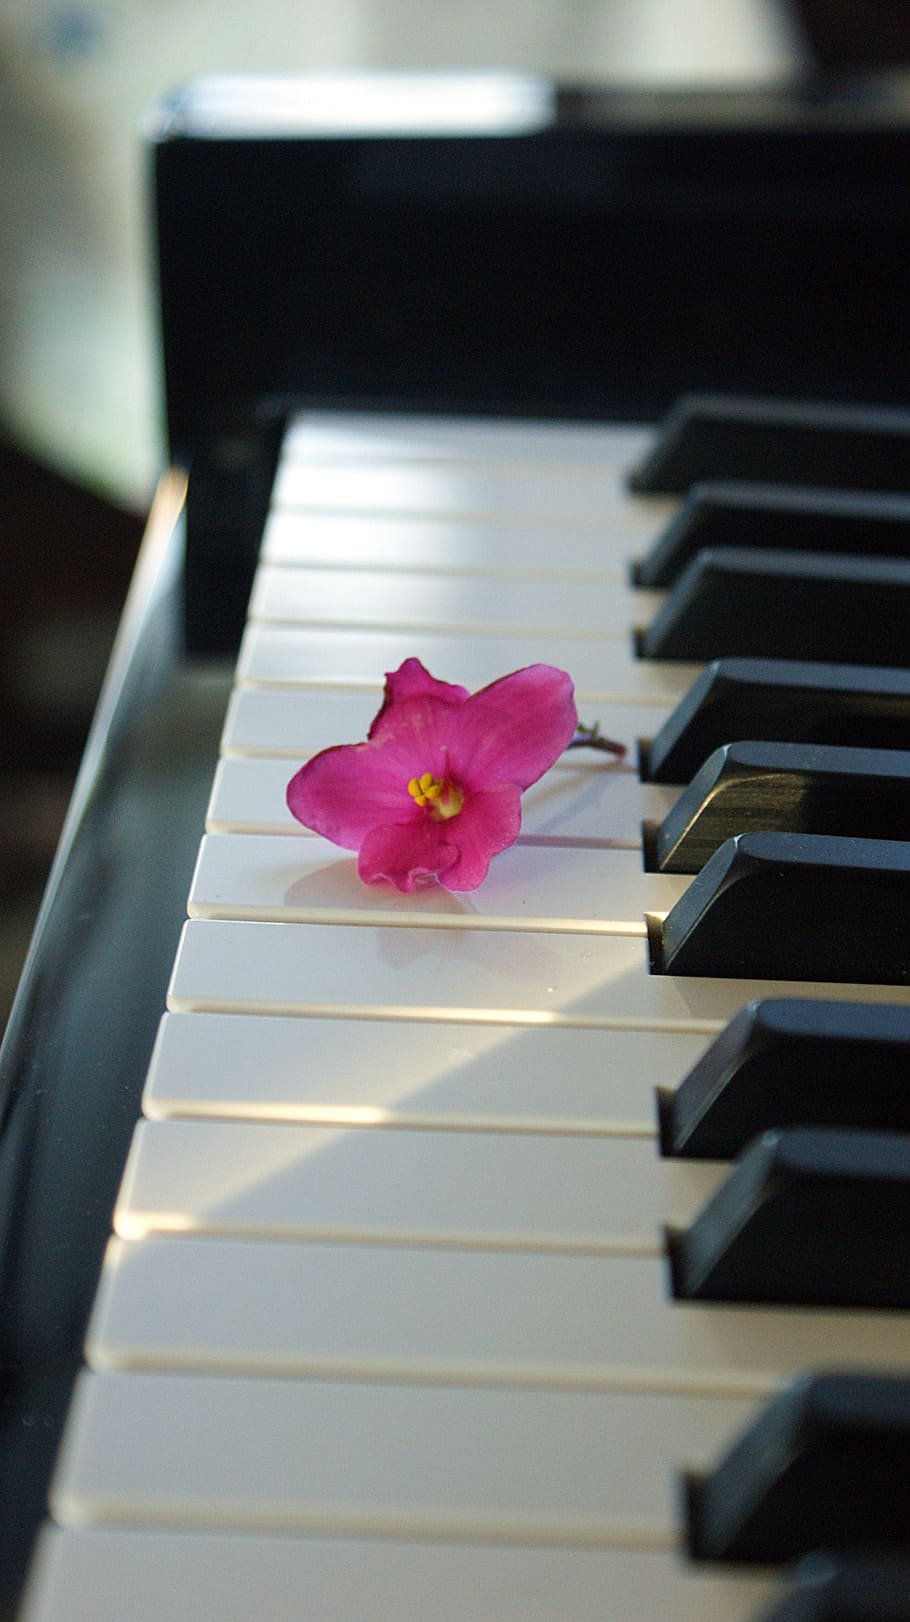 Flower, Pink, Piano, Music, Keys, pink flower, stilled, piano key, musical instrument, indoors